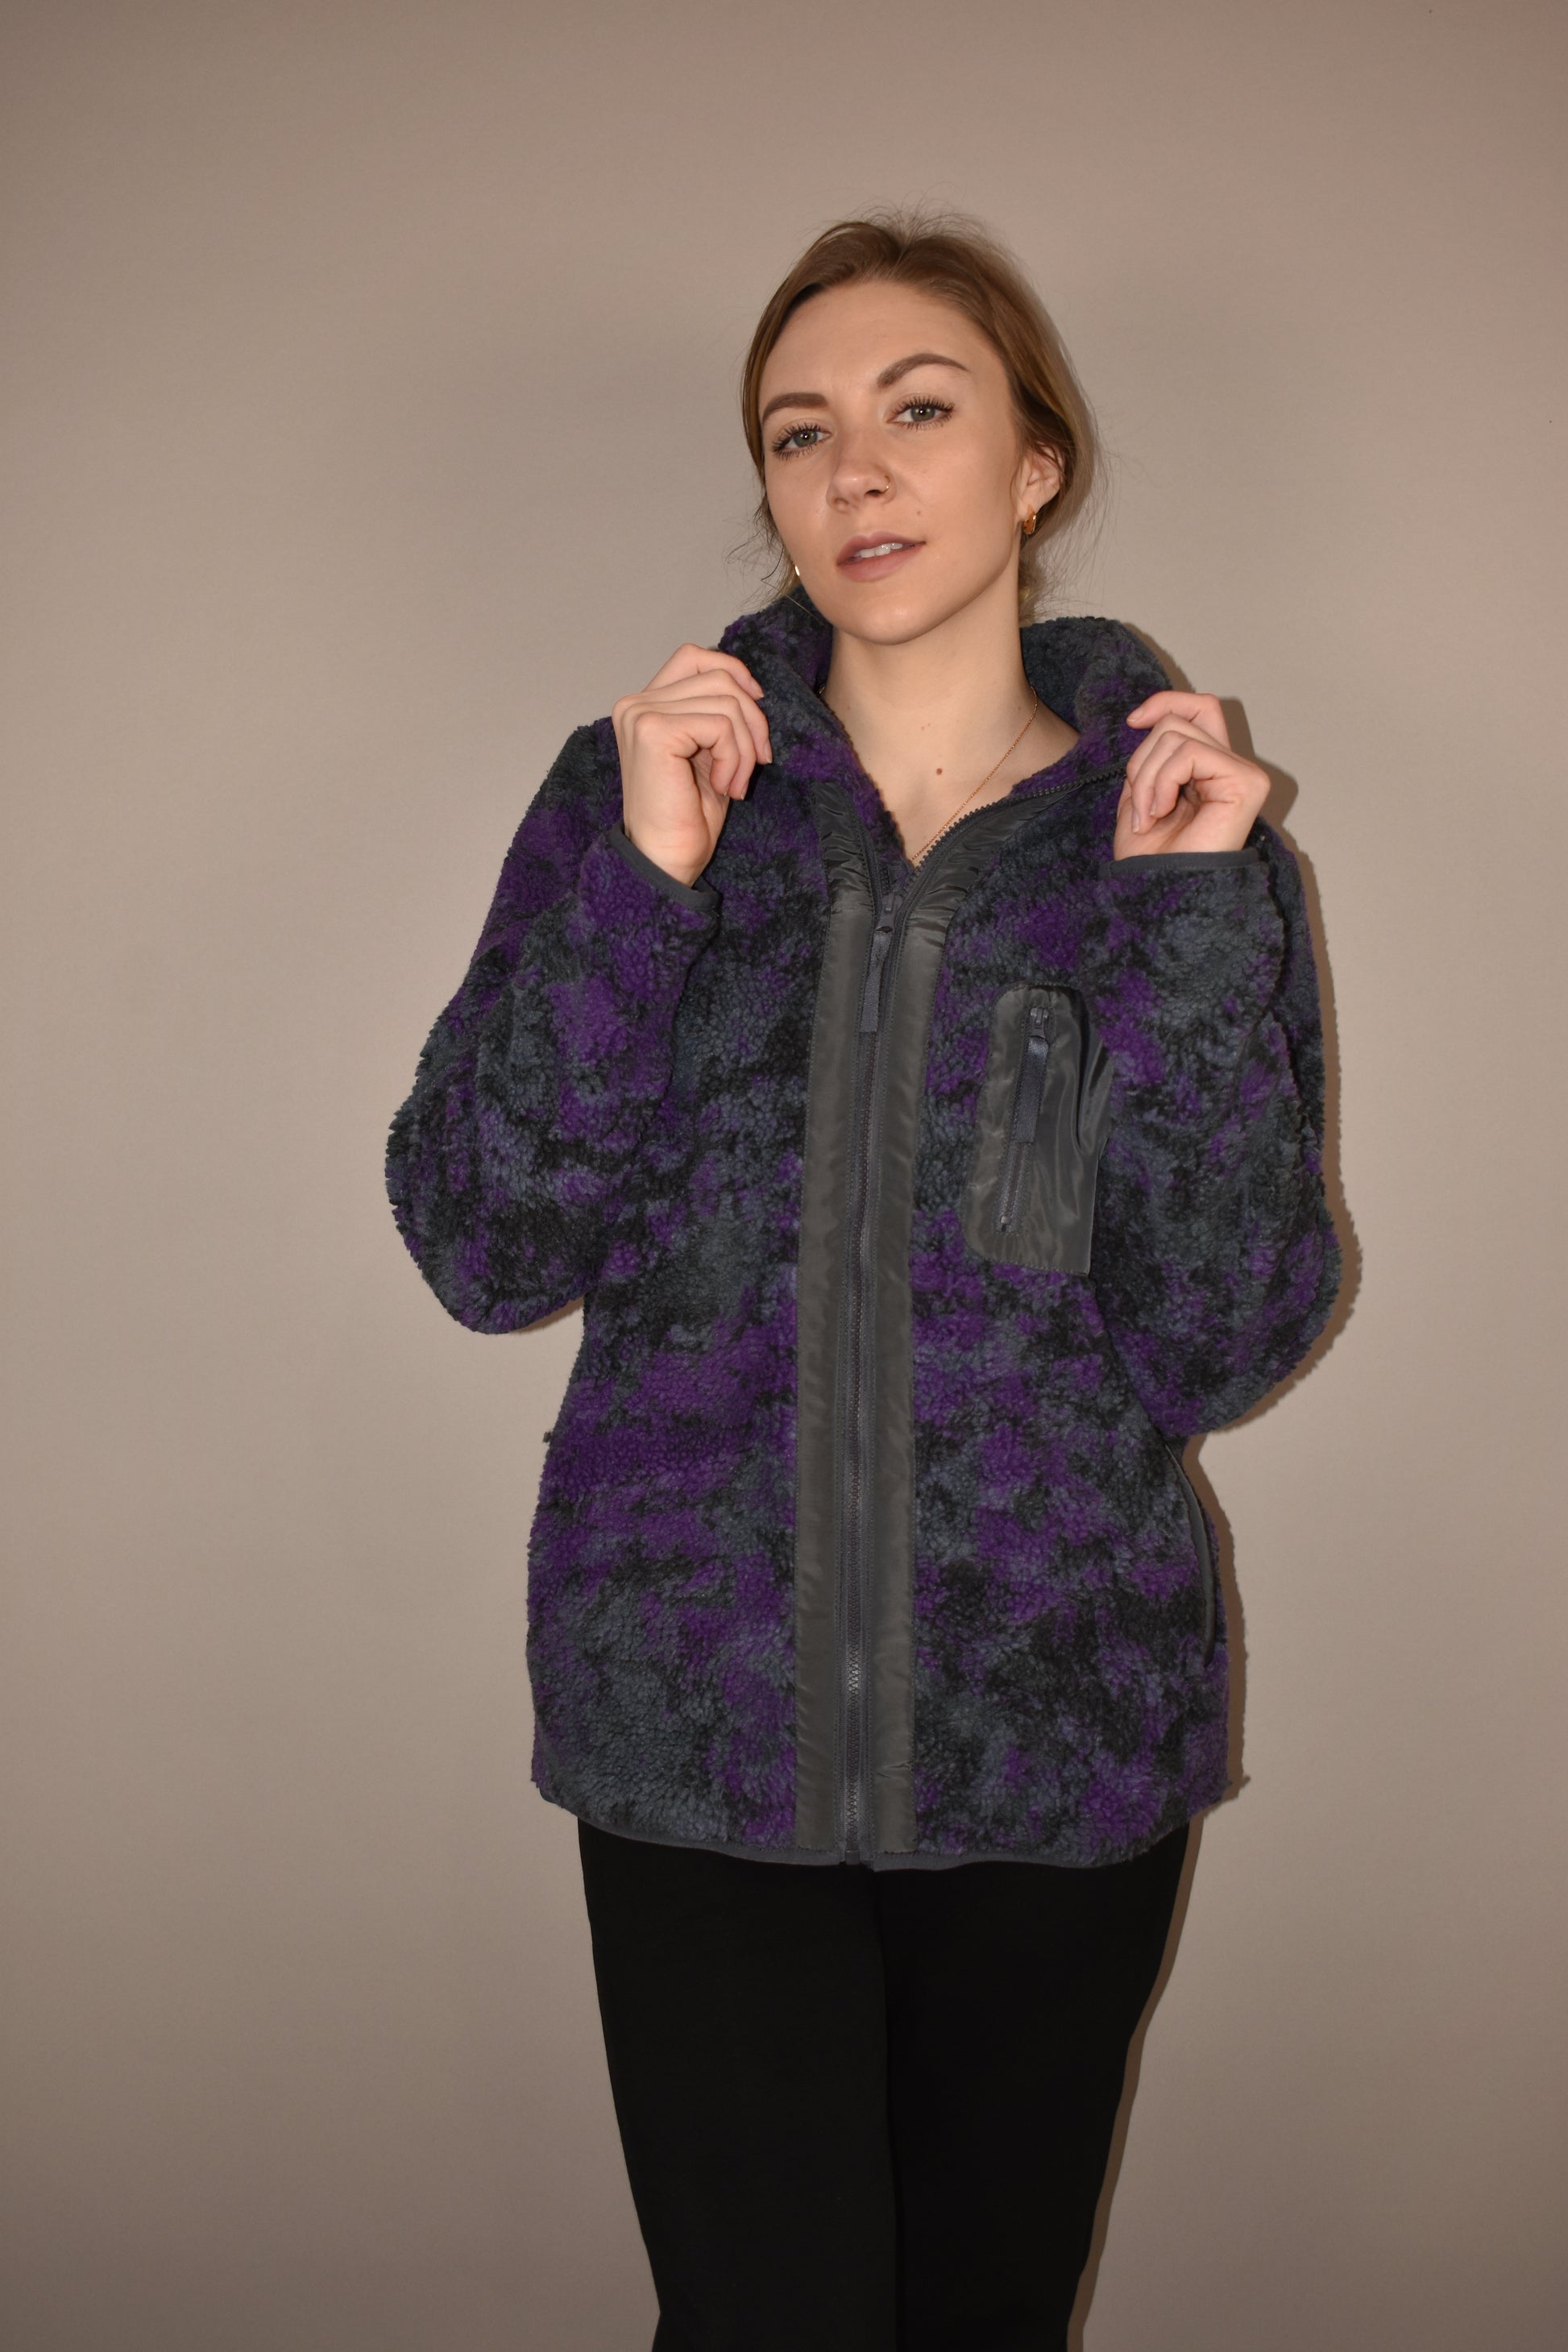 purple, black and gray tie dye full front zip sherpa jacket with one zip breast pocket and side pockets. zips up to a turtleneck and full length.